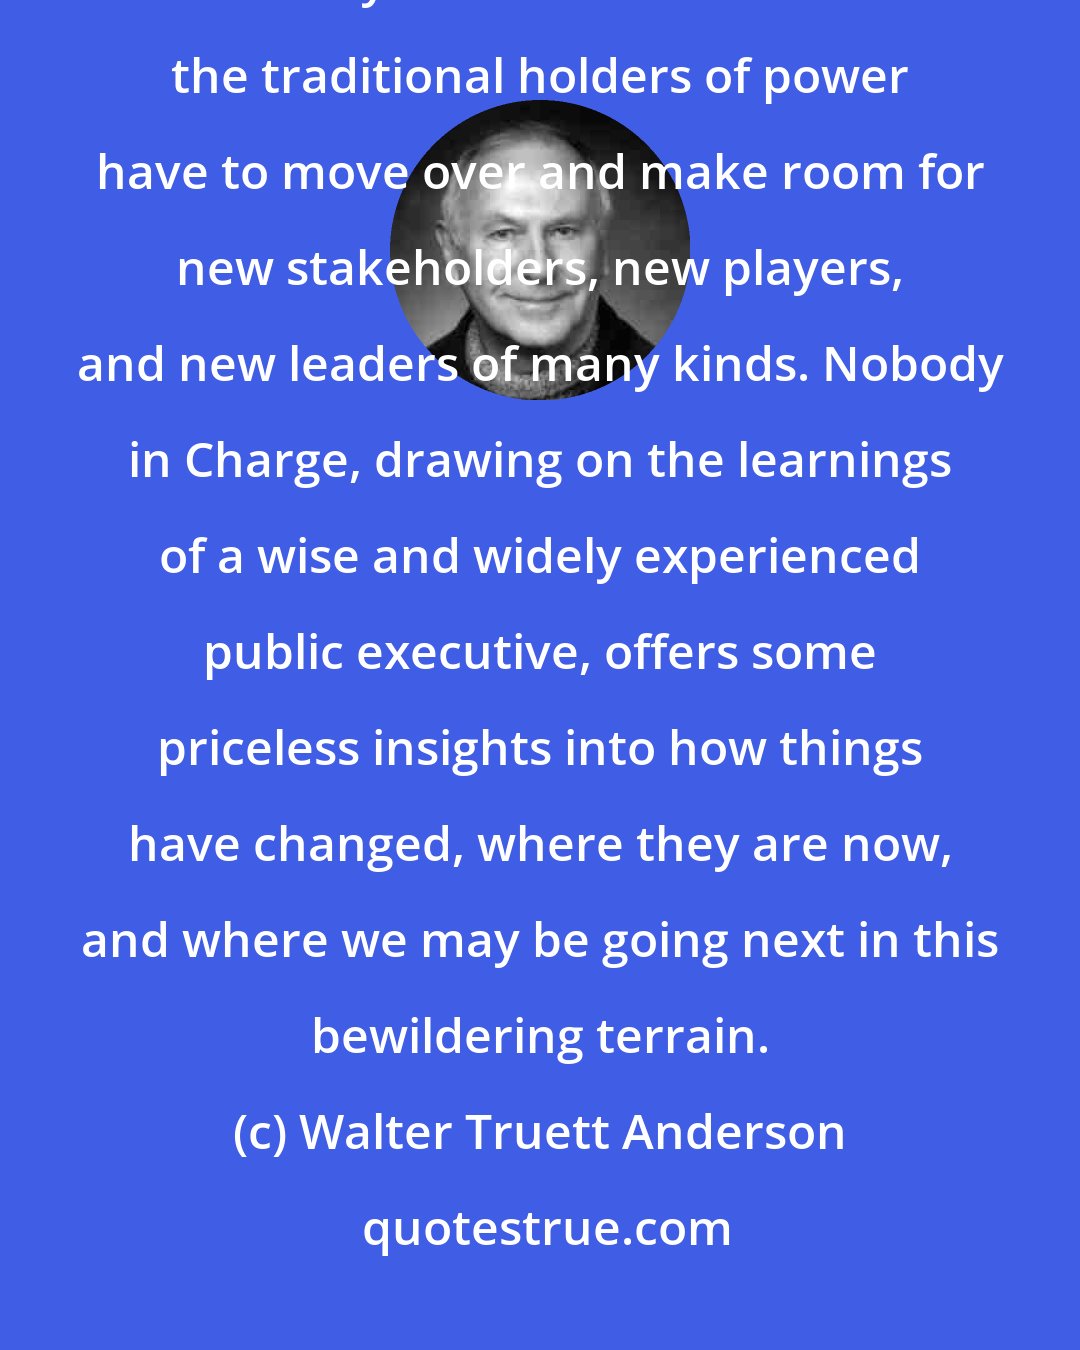 Walter Truett Anderson: We have entered a new and different world-richly interconnected and radically multicentric-in which the traditional holders of power have to move over and make room for new stakeholders, new players, and new leaders of many kinds. Nobody in Charge, drawing on the learnings of a wise and widely experienced public executive, offers some priceless insights into how things have changed, where they are now, and where we may be going next in this bewildering terrain.